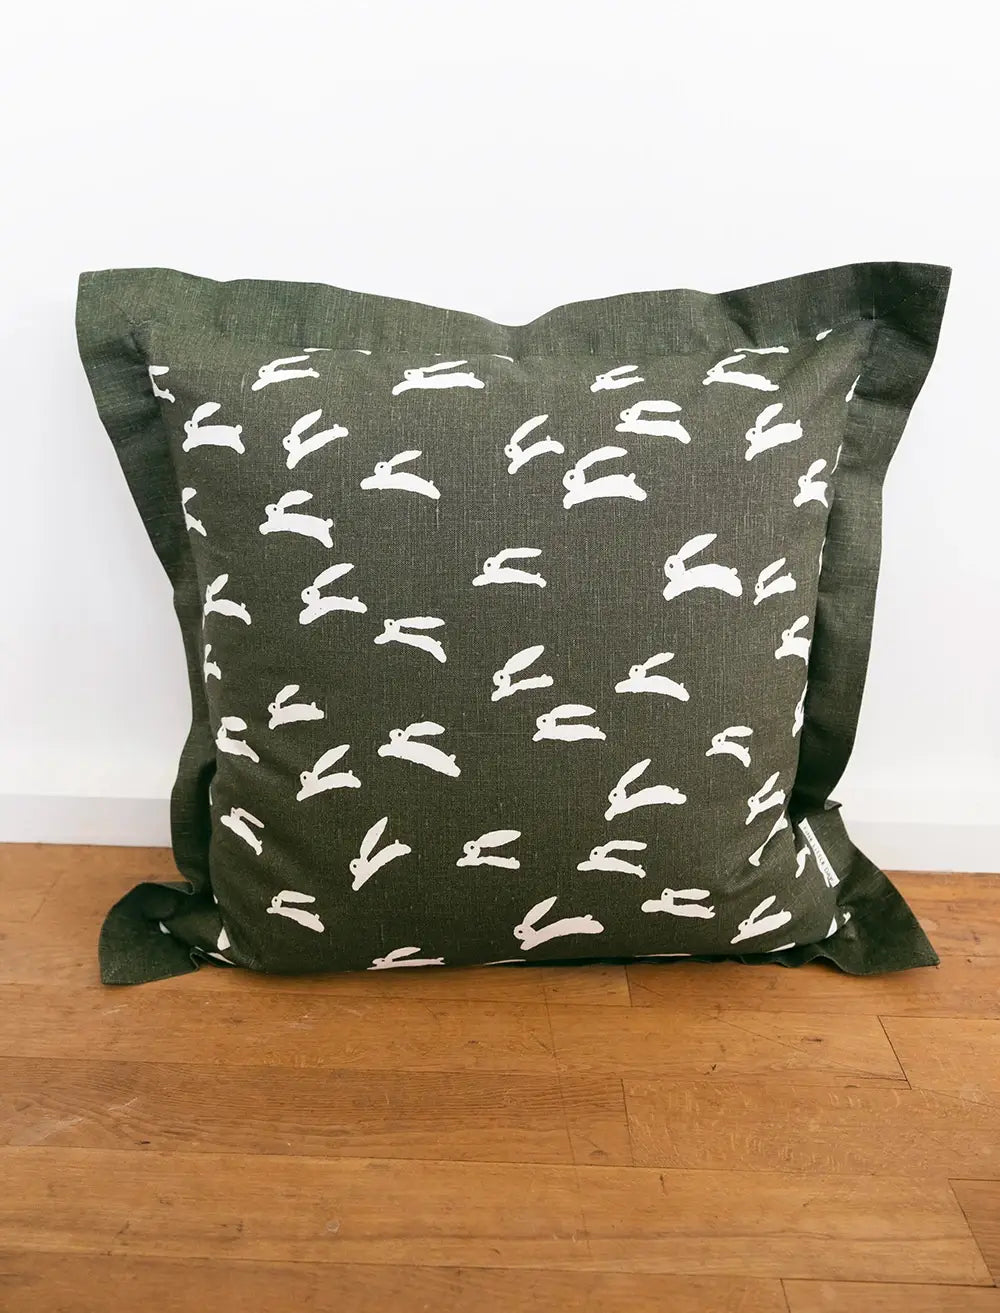 A square moss green cushion with playful white rabbit print by Fine Little Day